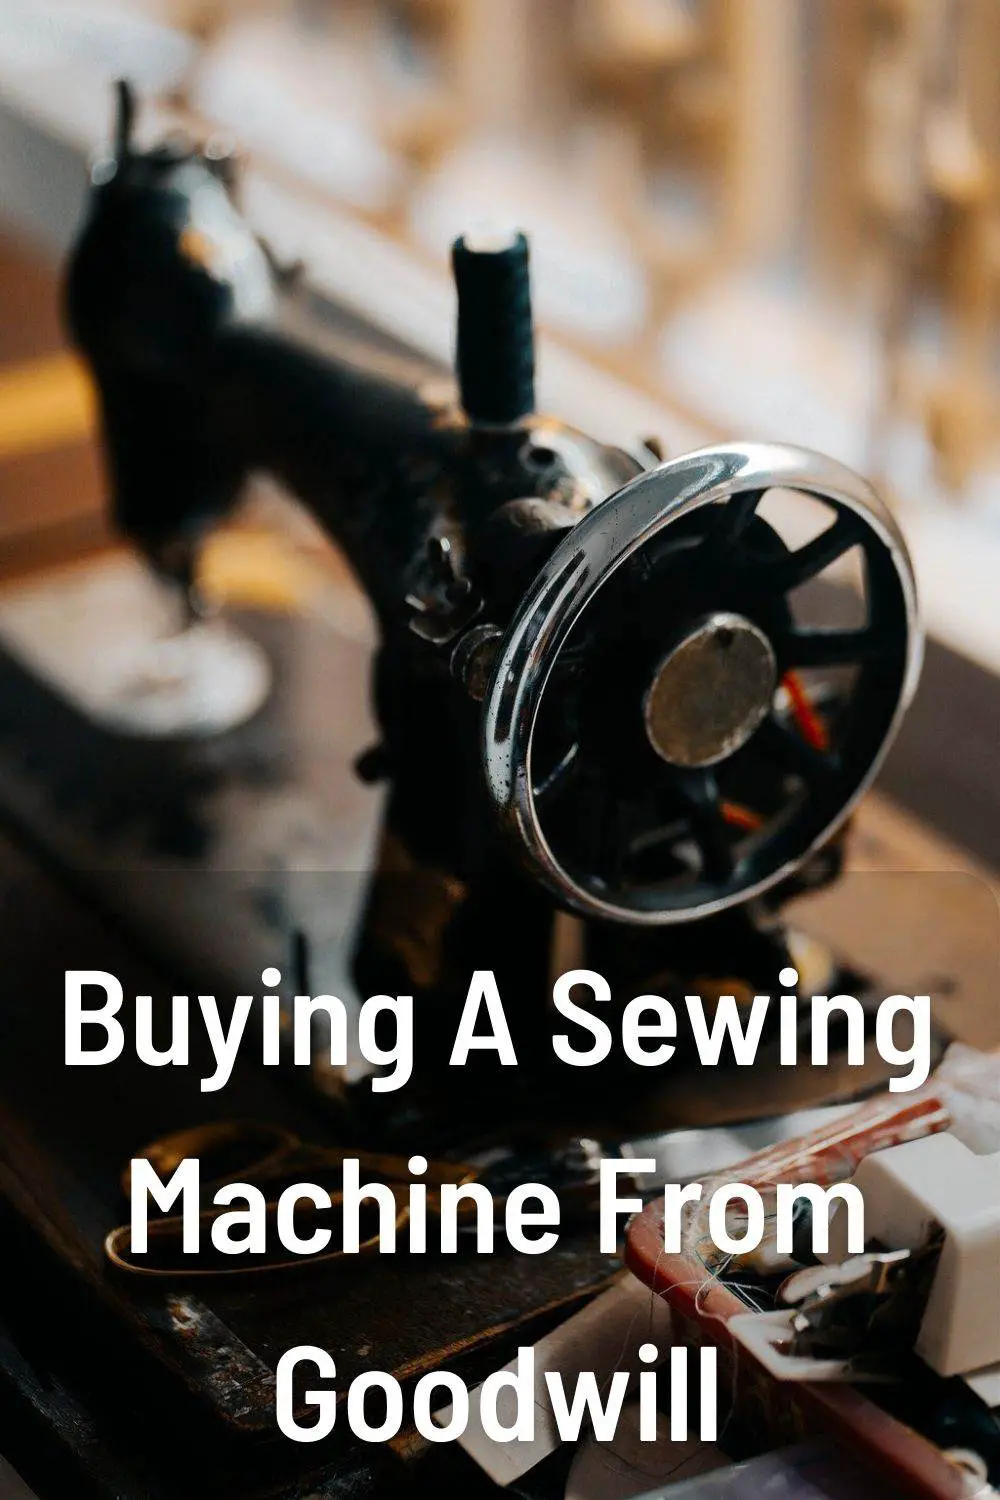 Buying A Sewing Machine From Goodwill